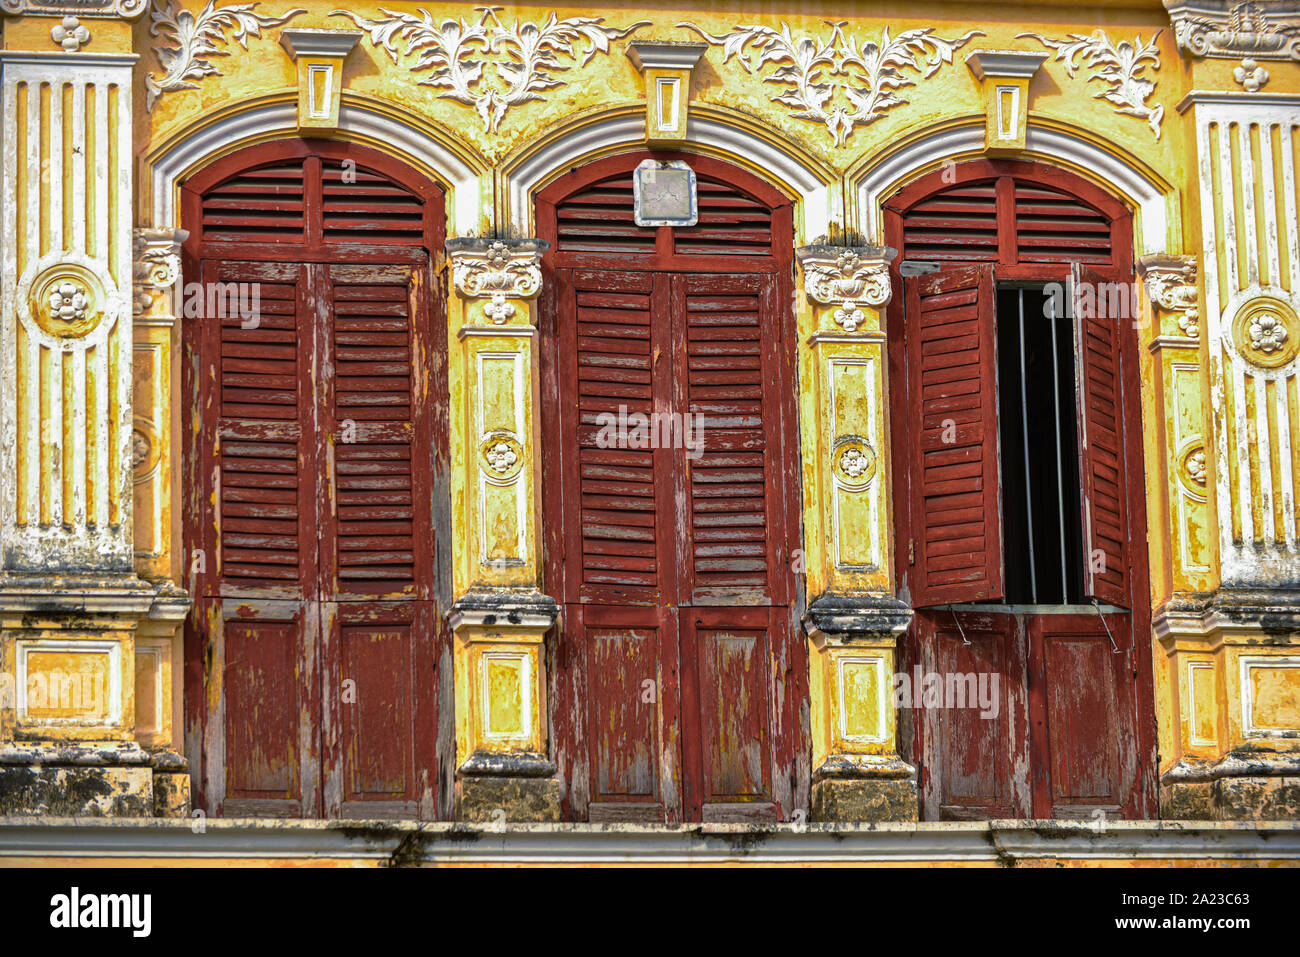 Rustic wooden doors of classic sino portuguese architecture in old town Phuket Thailand Stock Photo